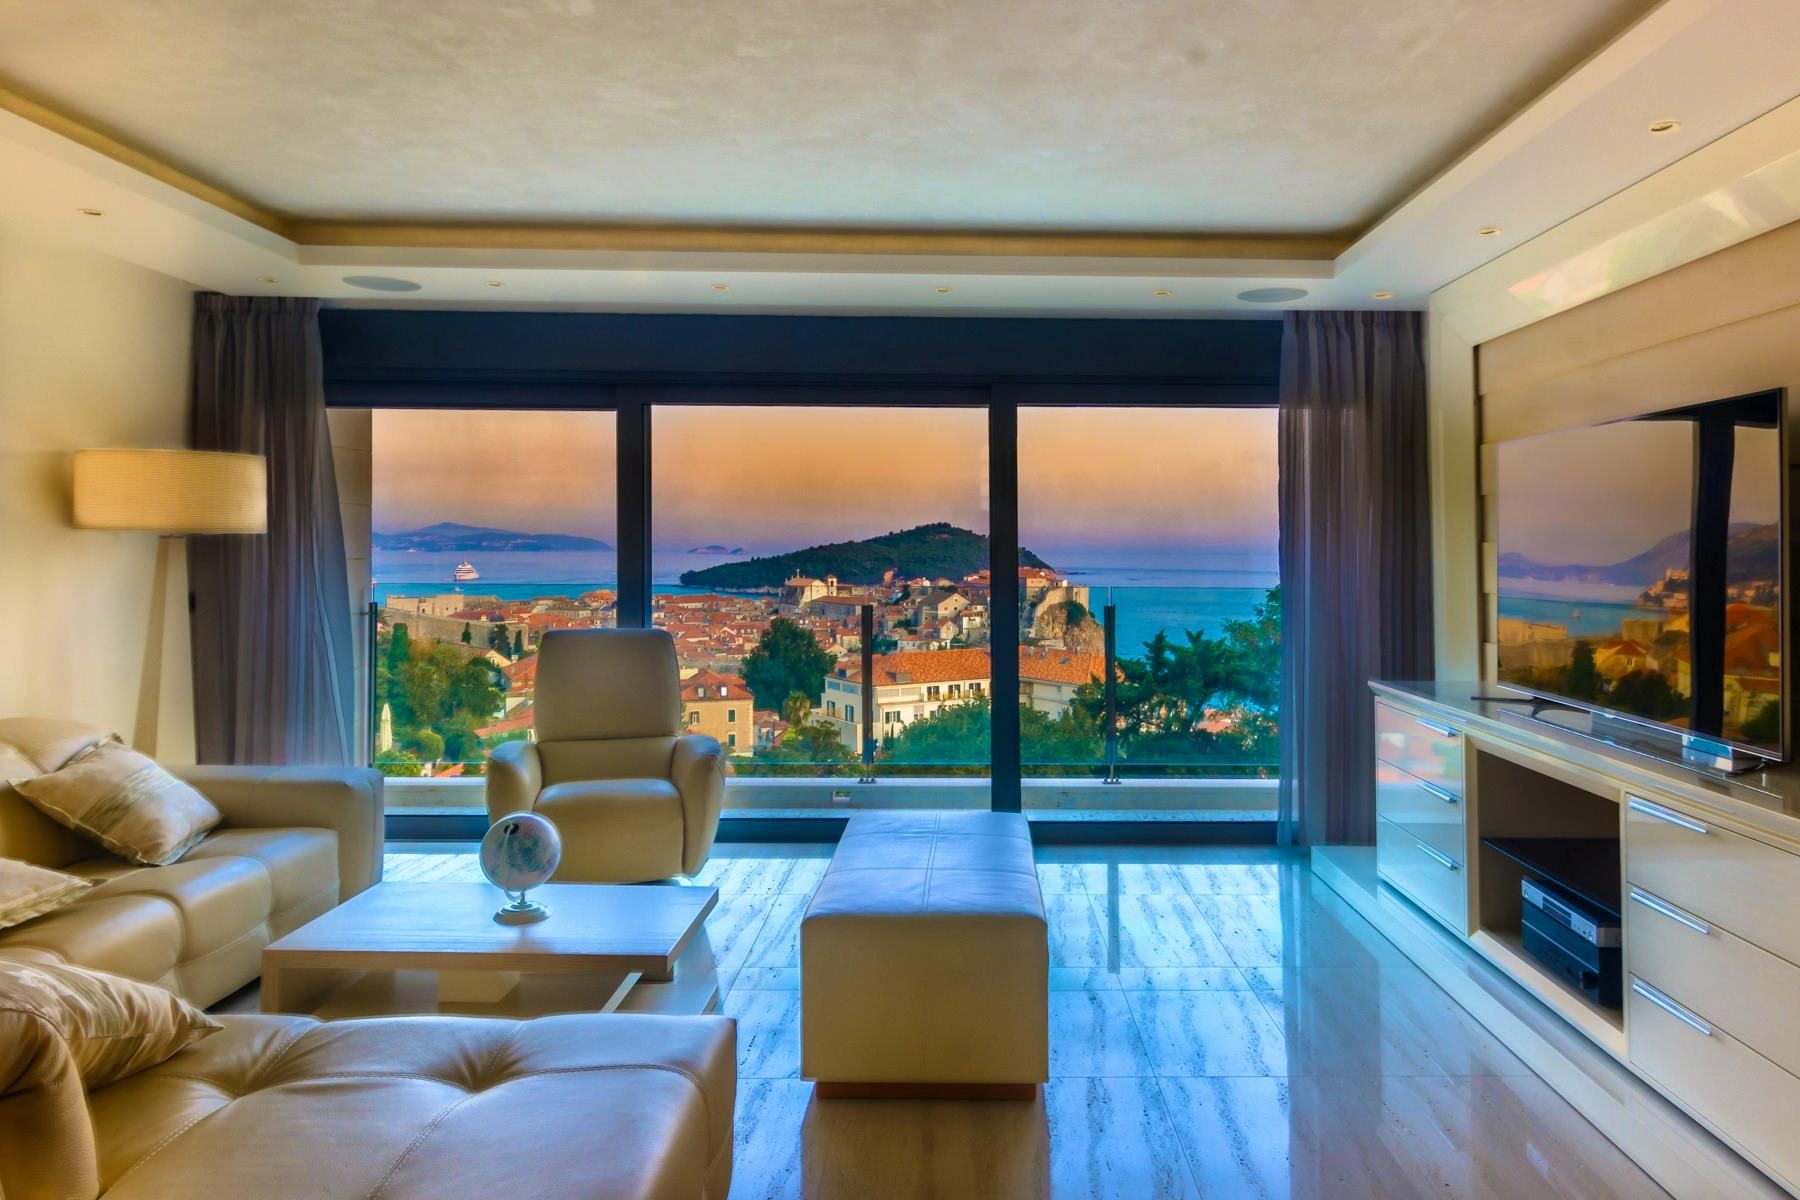 Spectacular views from the living room